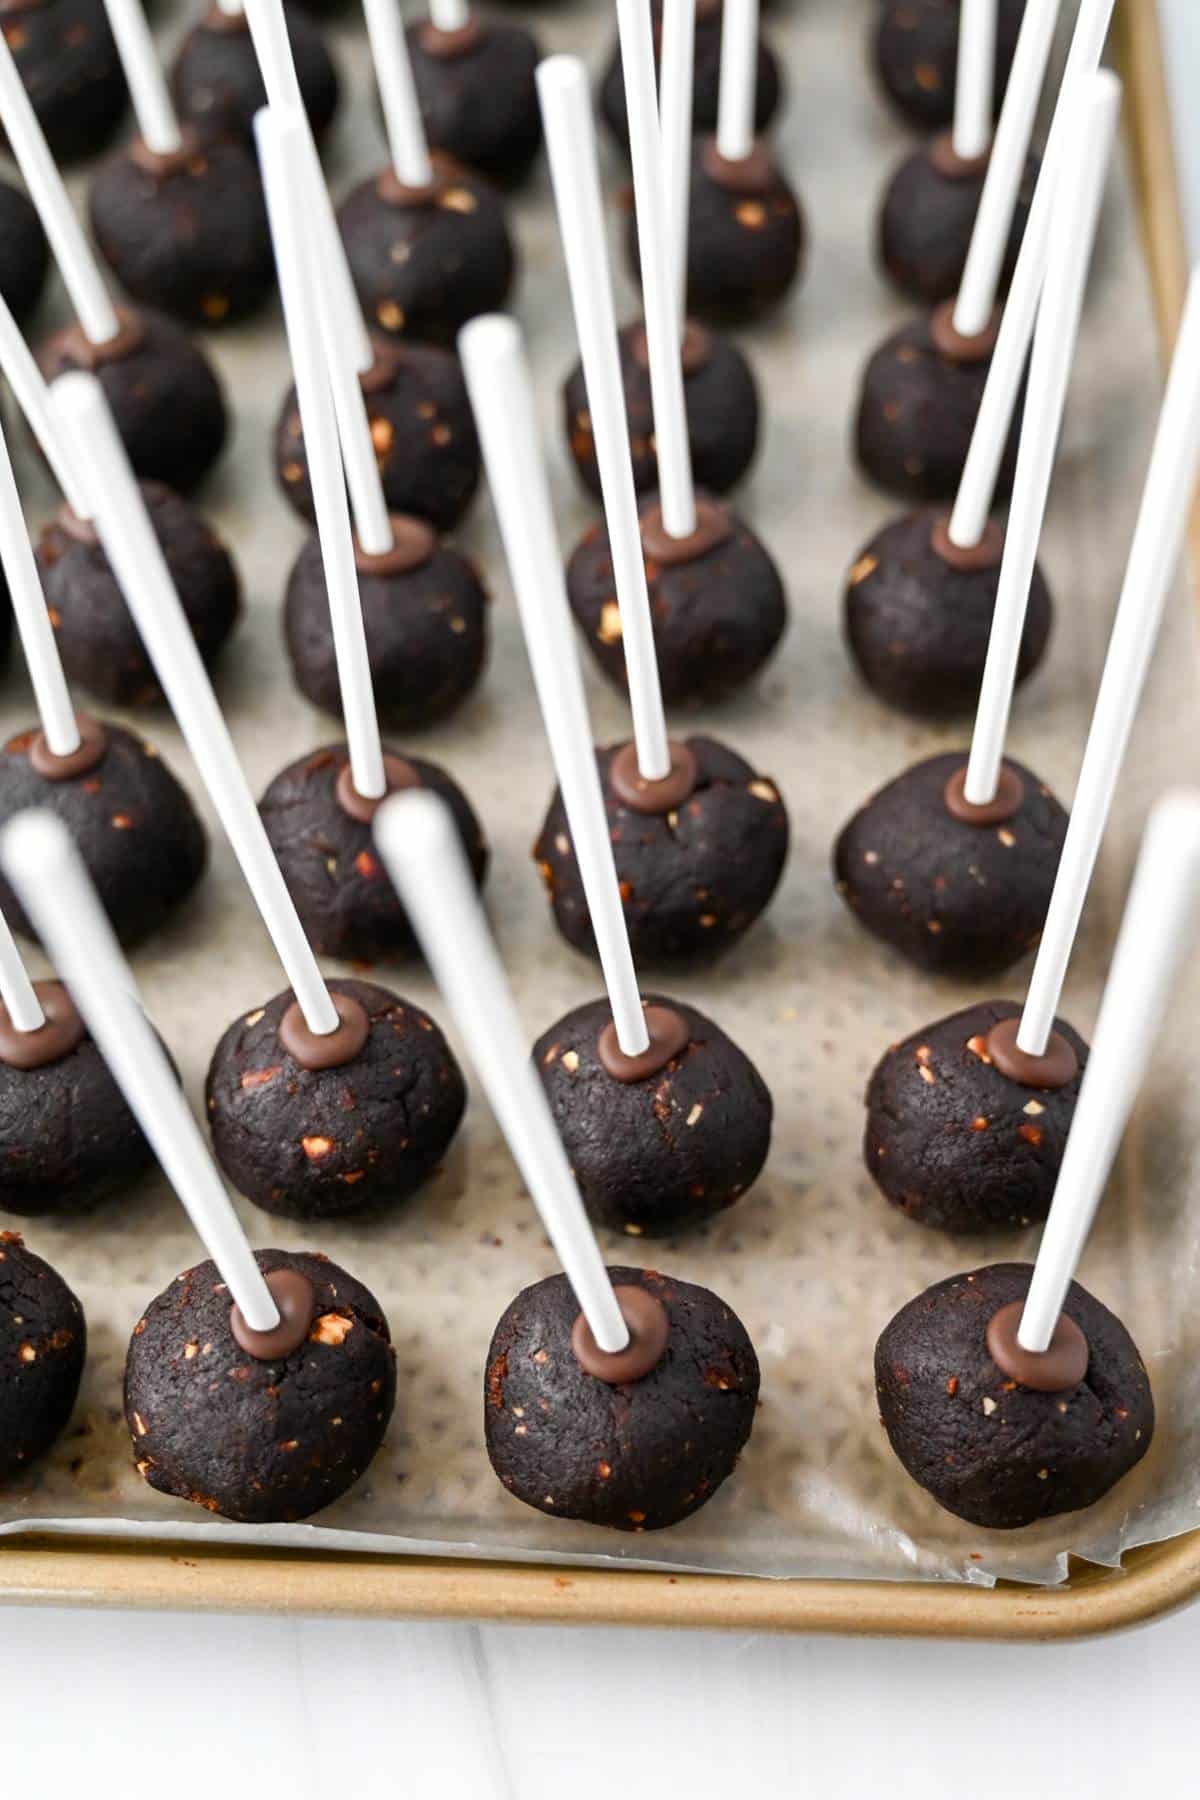 Cake pops with sticks in them that were dipped in chocolate to stick